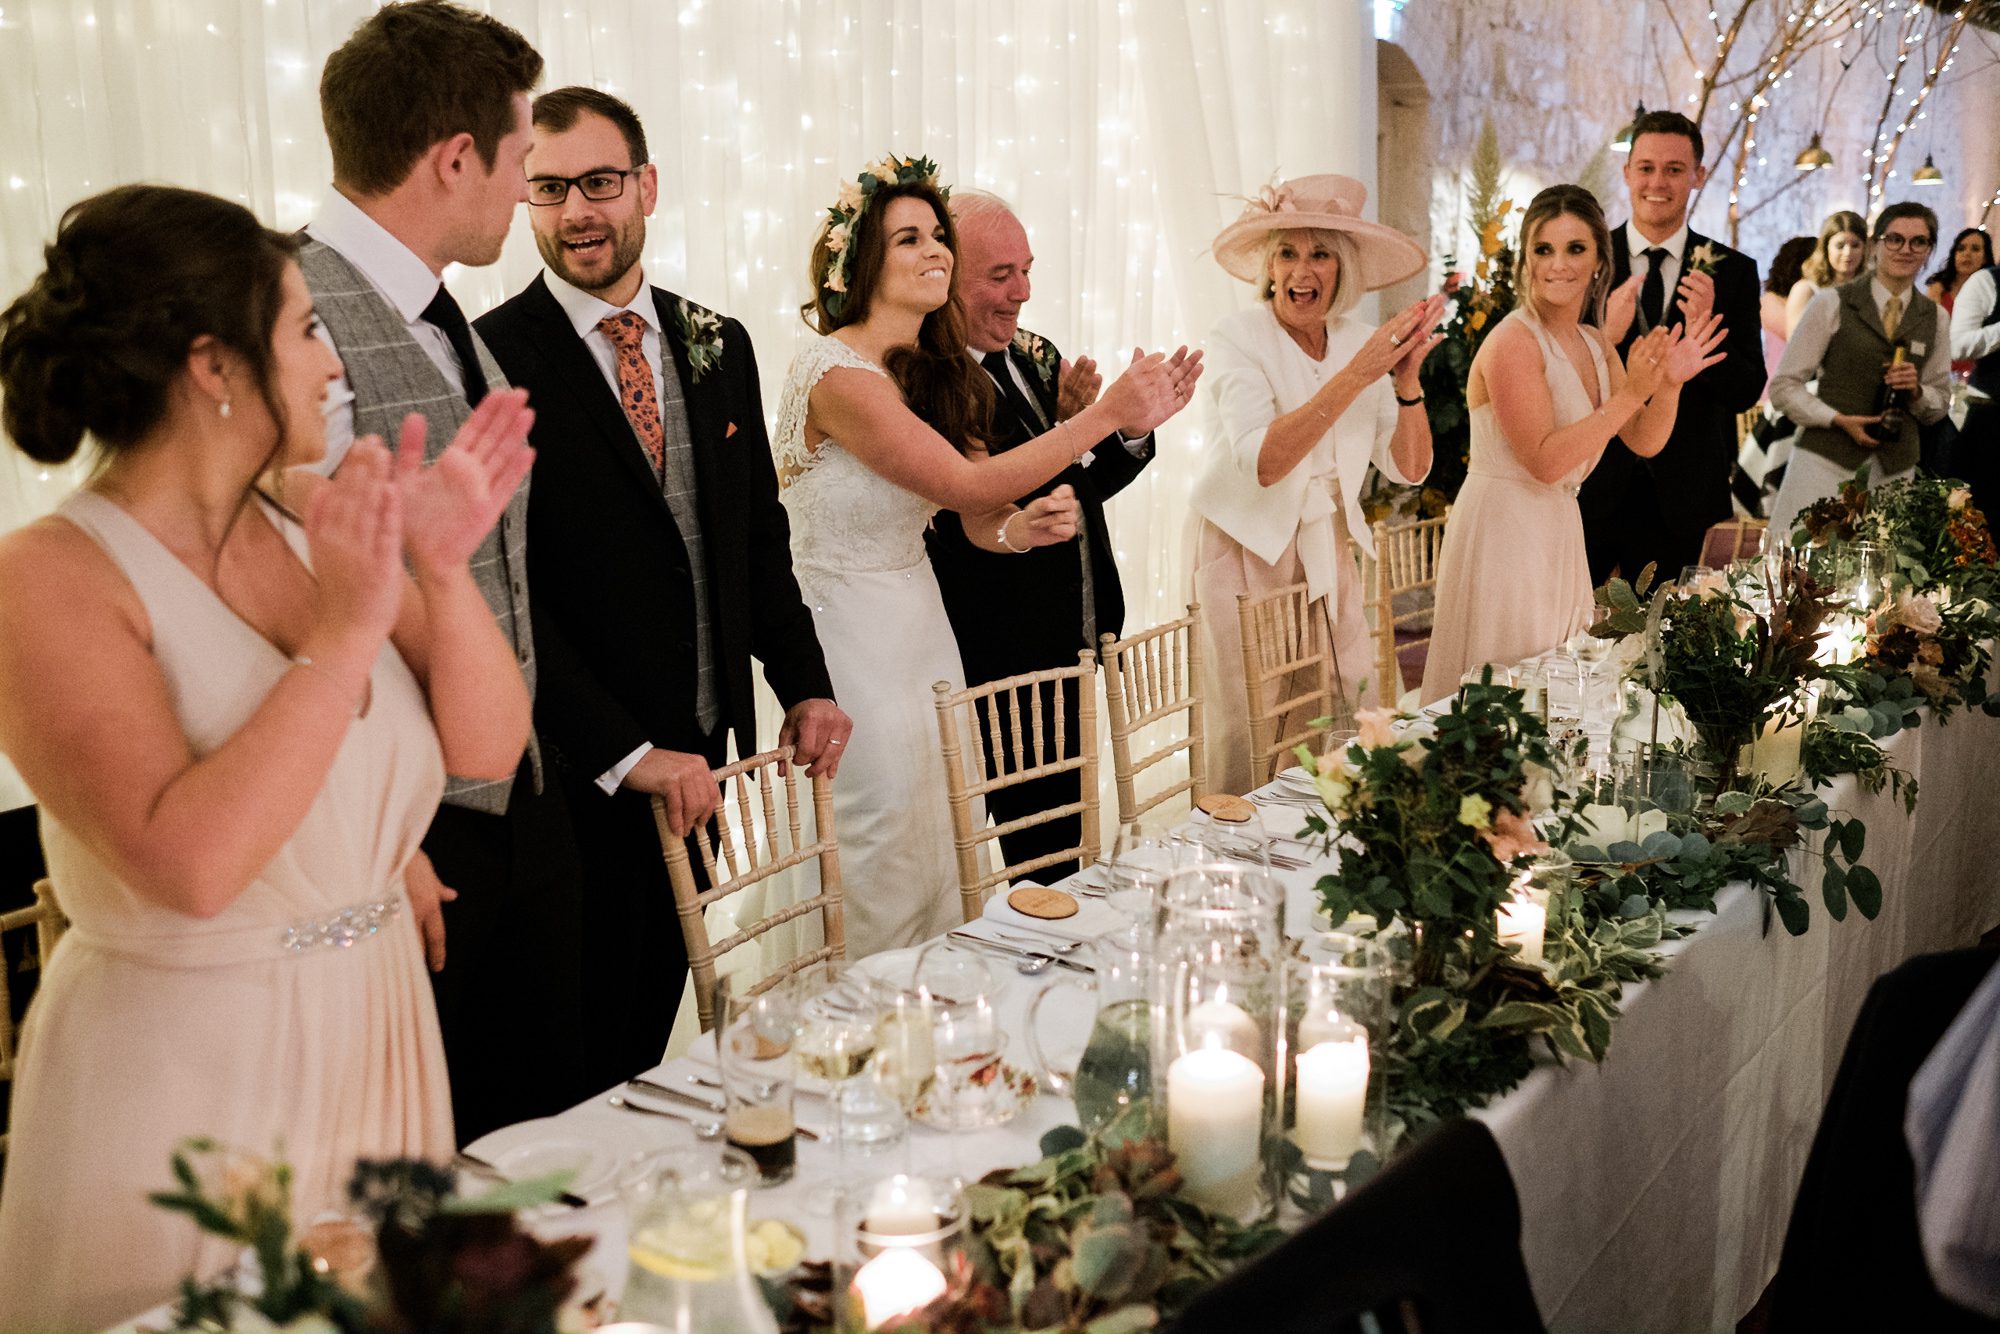 bridal party clapping guests at dinner